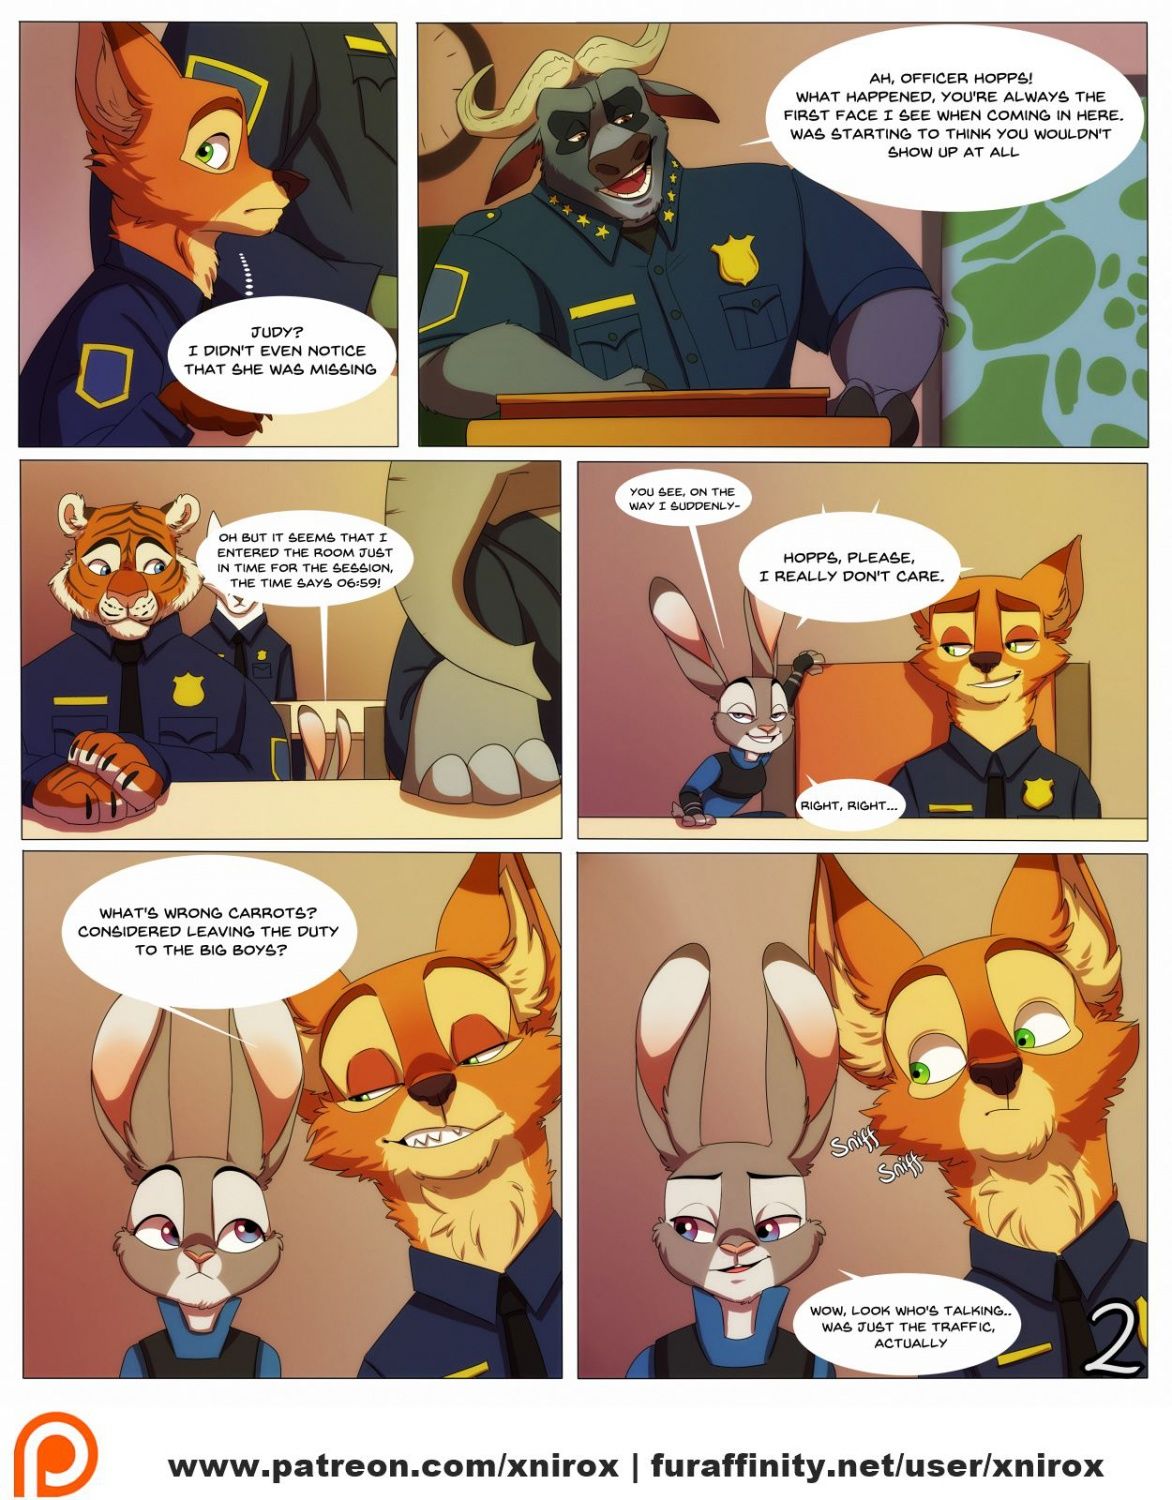 [Xnirox] Zootopia - Twitterpated, Furry Cartoon page 2